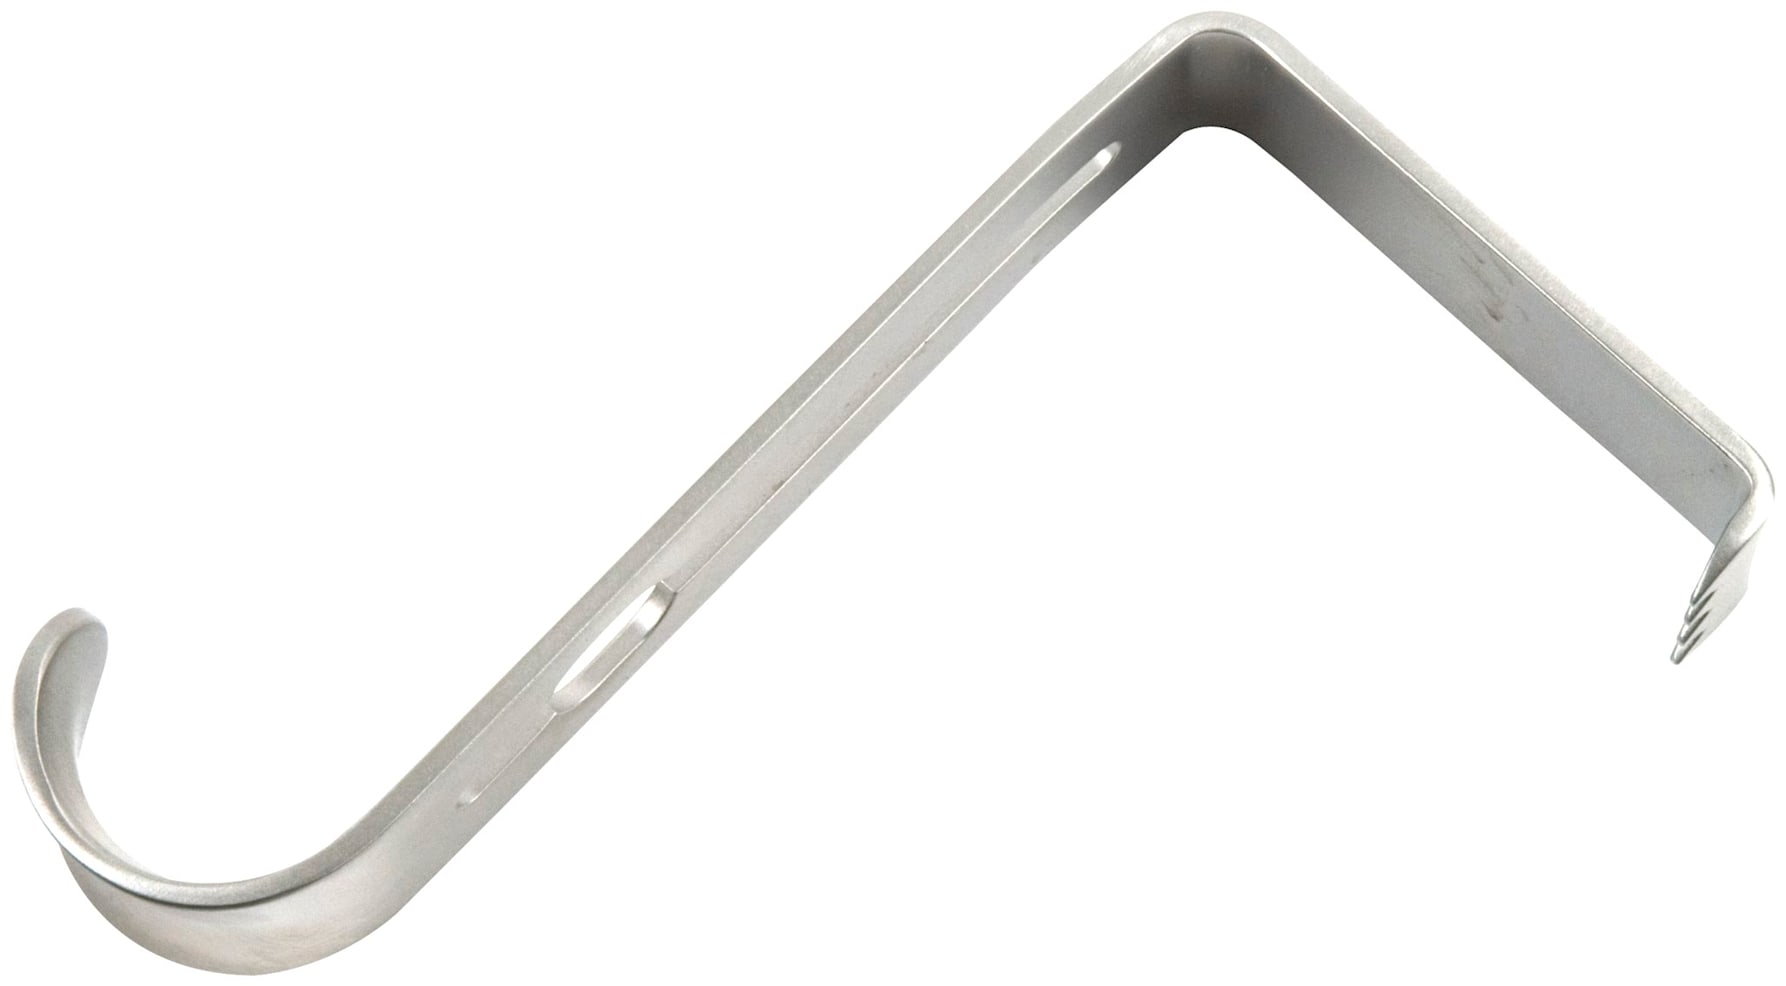 Modular Soft Tissue Retractor Replacement Paddle, 50 mm, Ctr